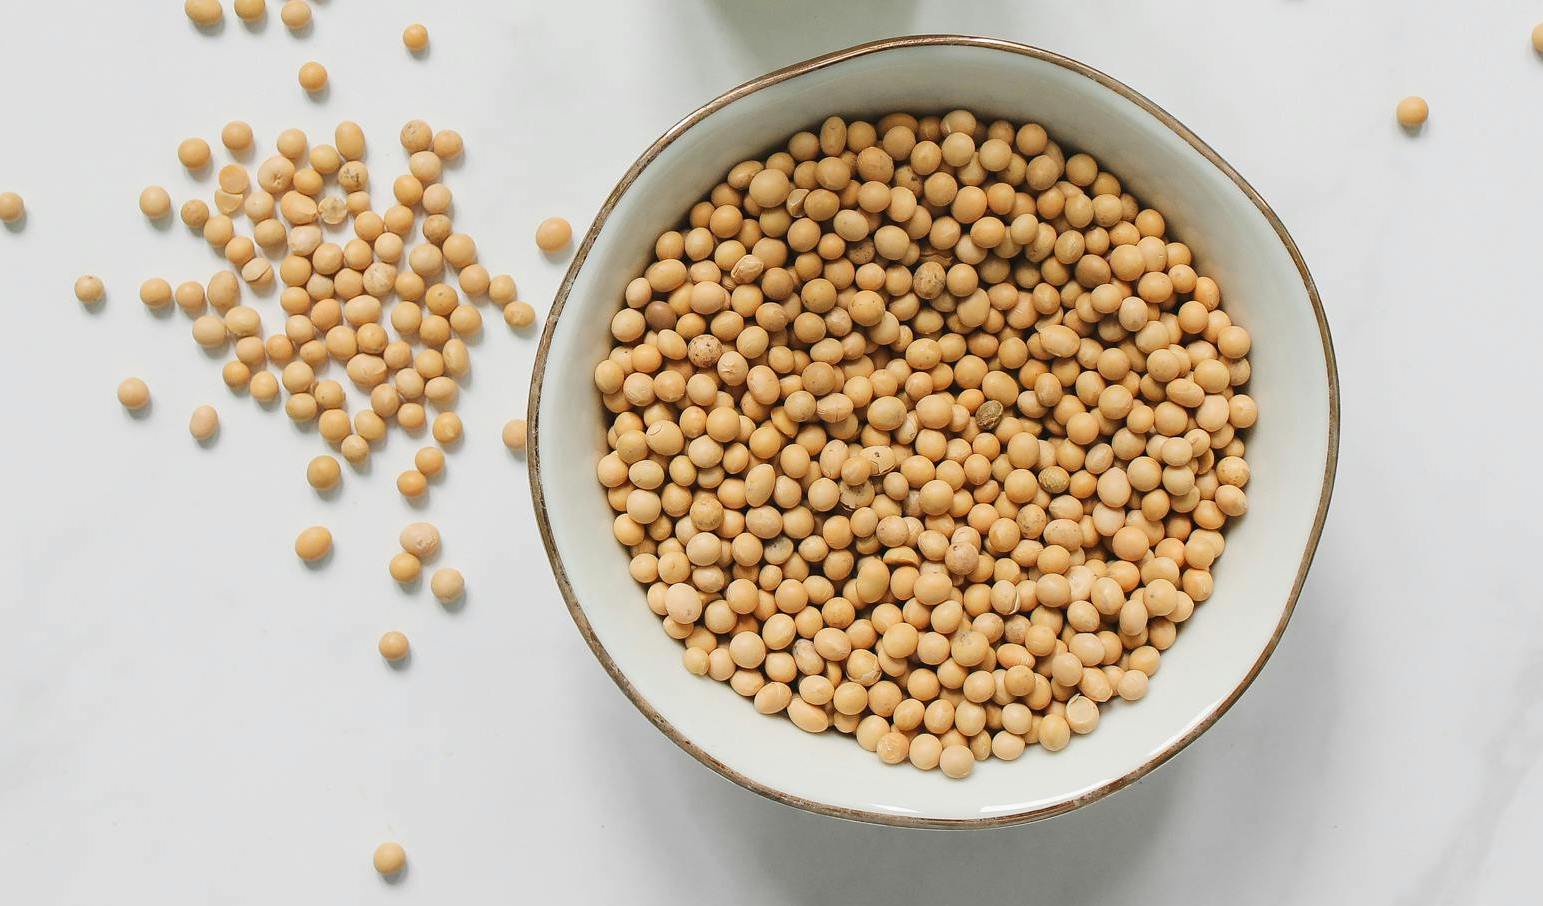 Bowl of dried soybeans with loose dried beans spread around it on a marble countertop